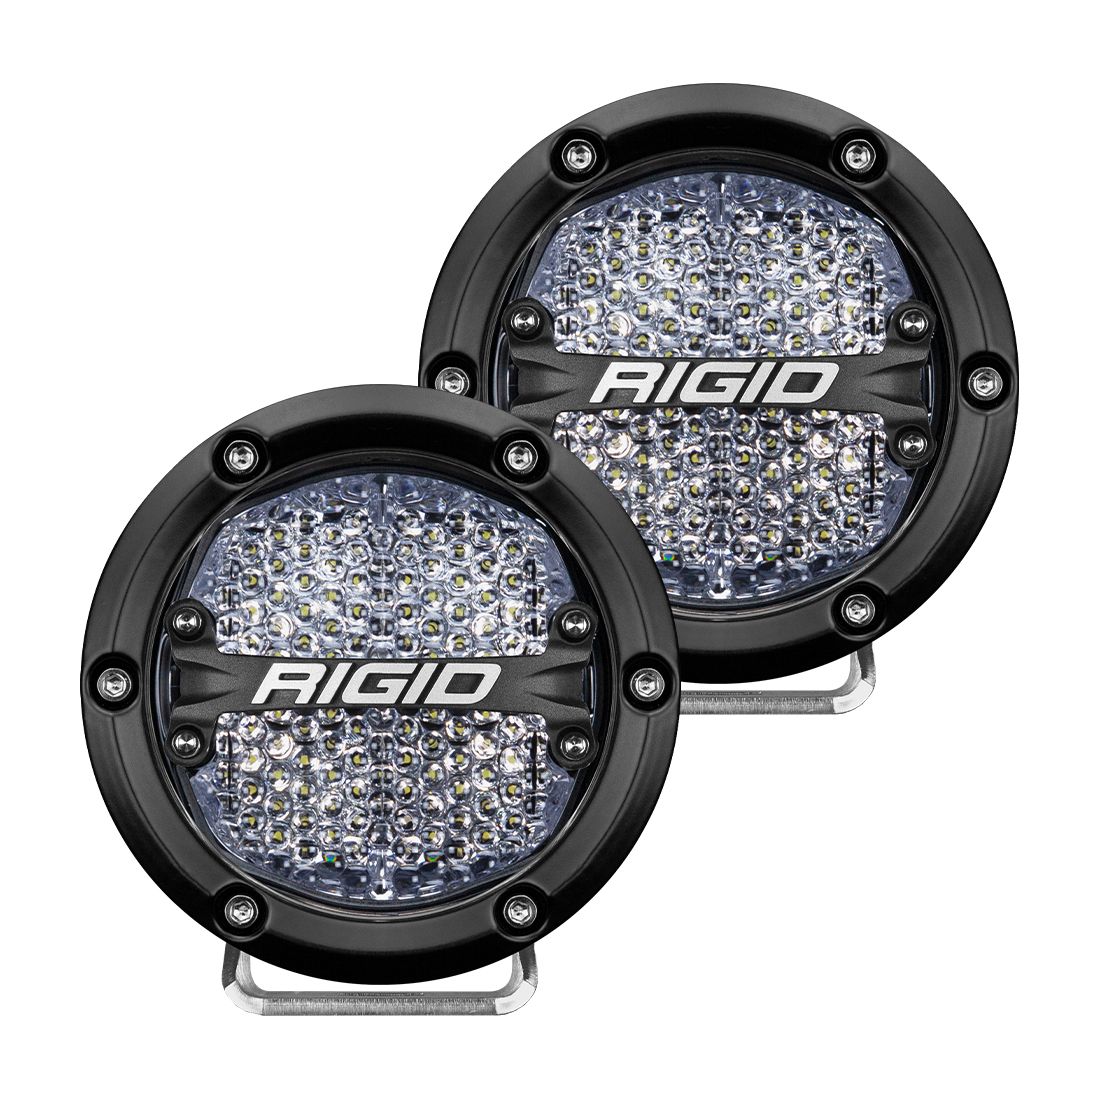 Rigid 36208 360-Series 4 Inch LED Off-Road Diffused Optic with White Backlight Pair - BumperStock